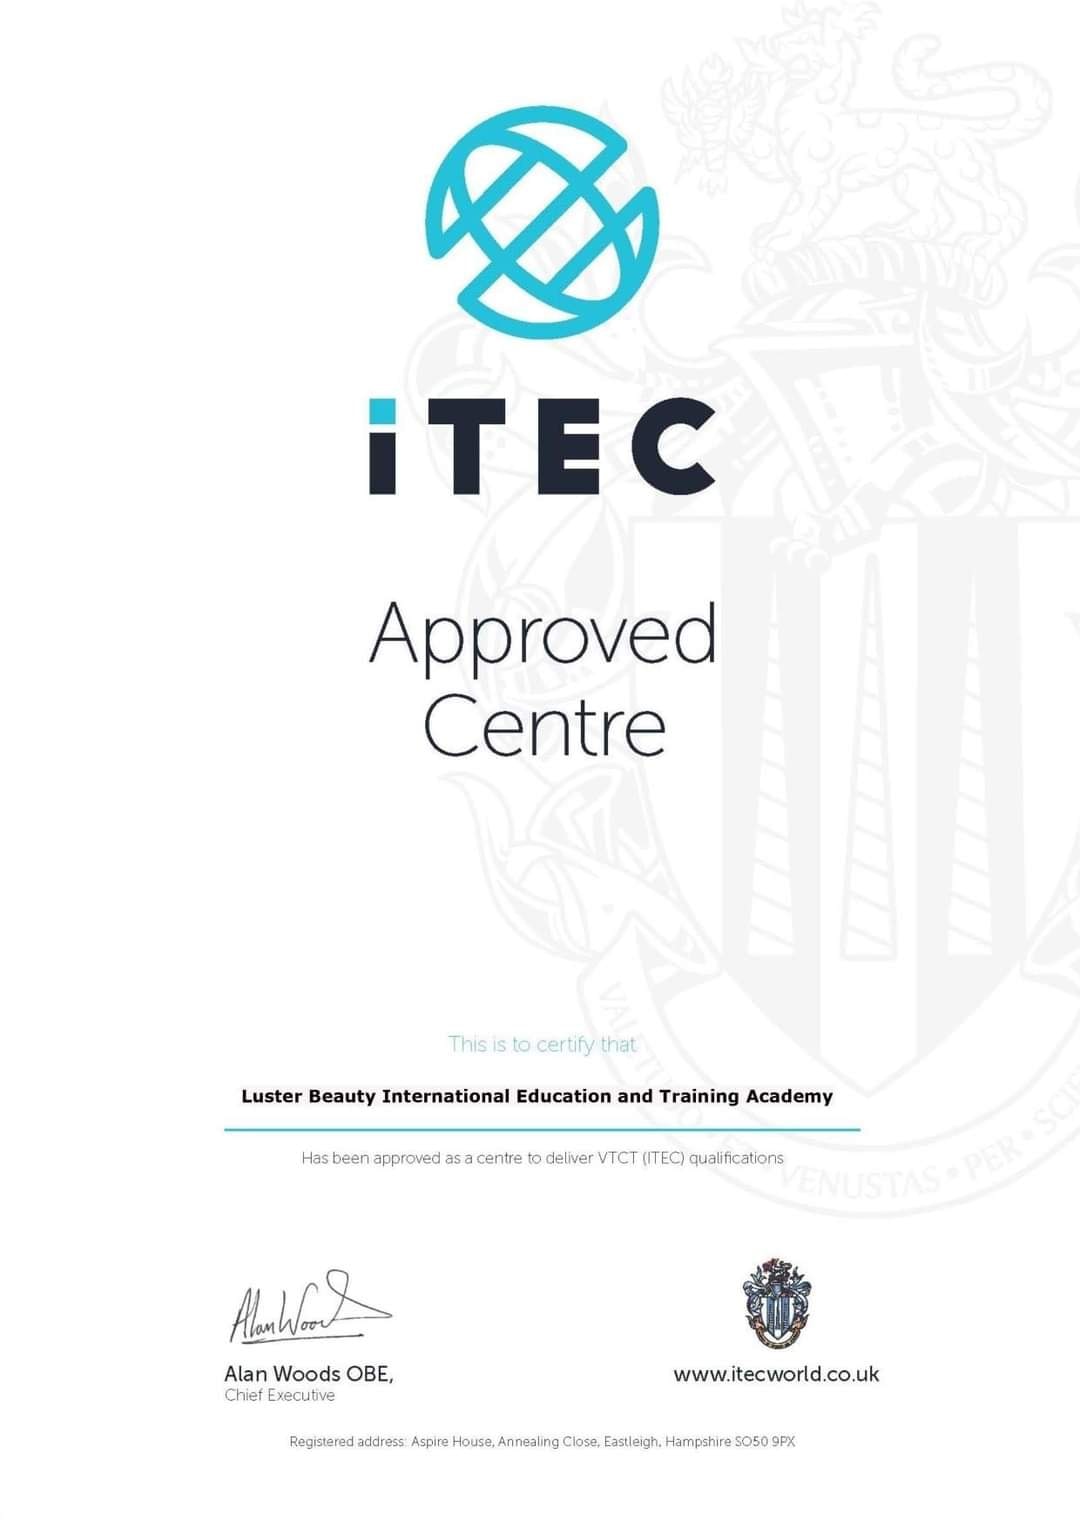 itec approved centre luster beauty international education and training academy partnership